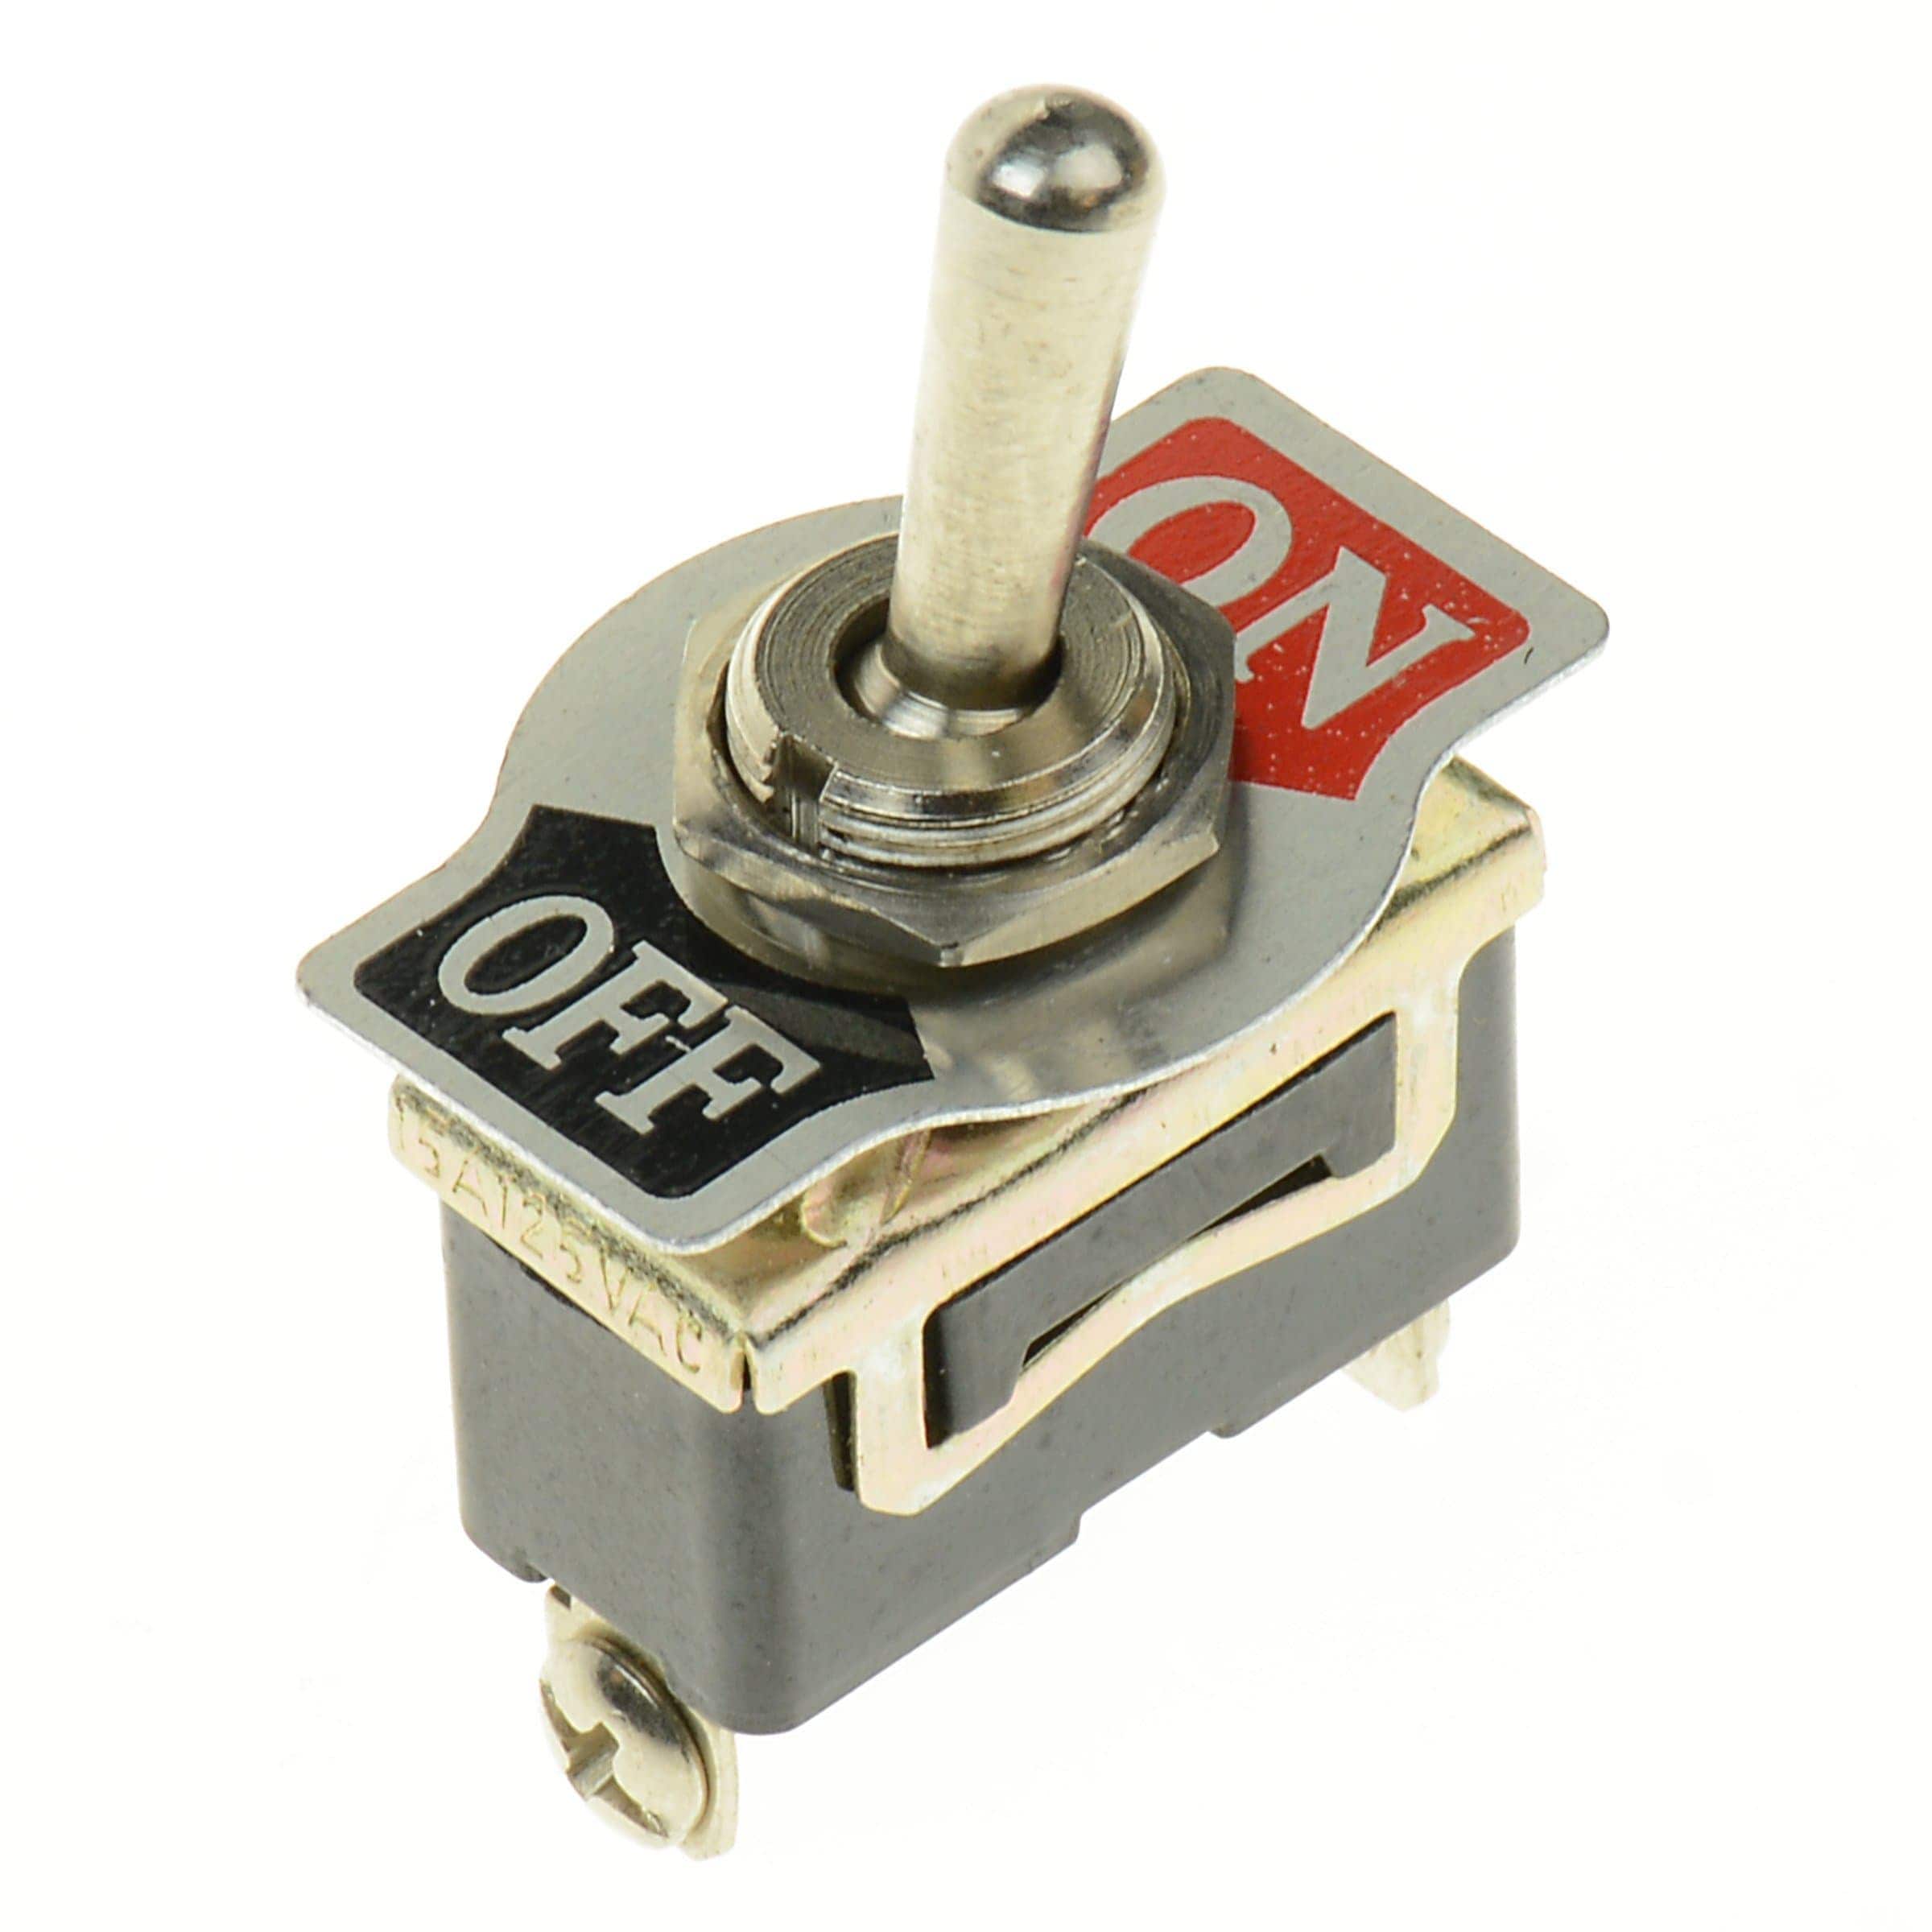 TH Marine Chrome Plated On-Off Toggle Switch Marine Accessory - Chrome -  BE-EL-51330-DP